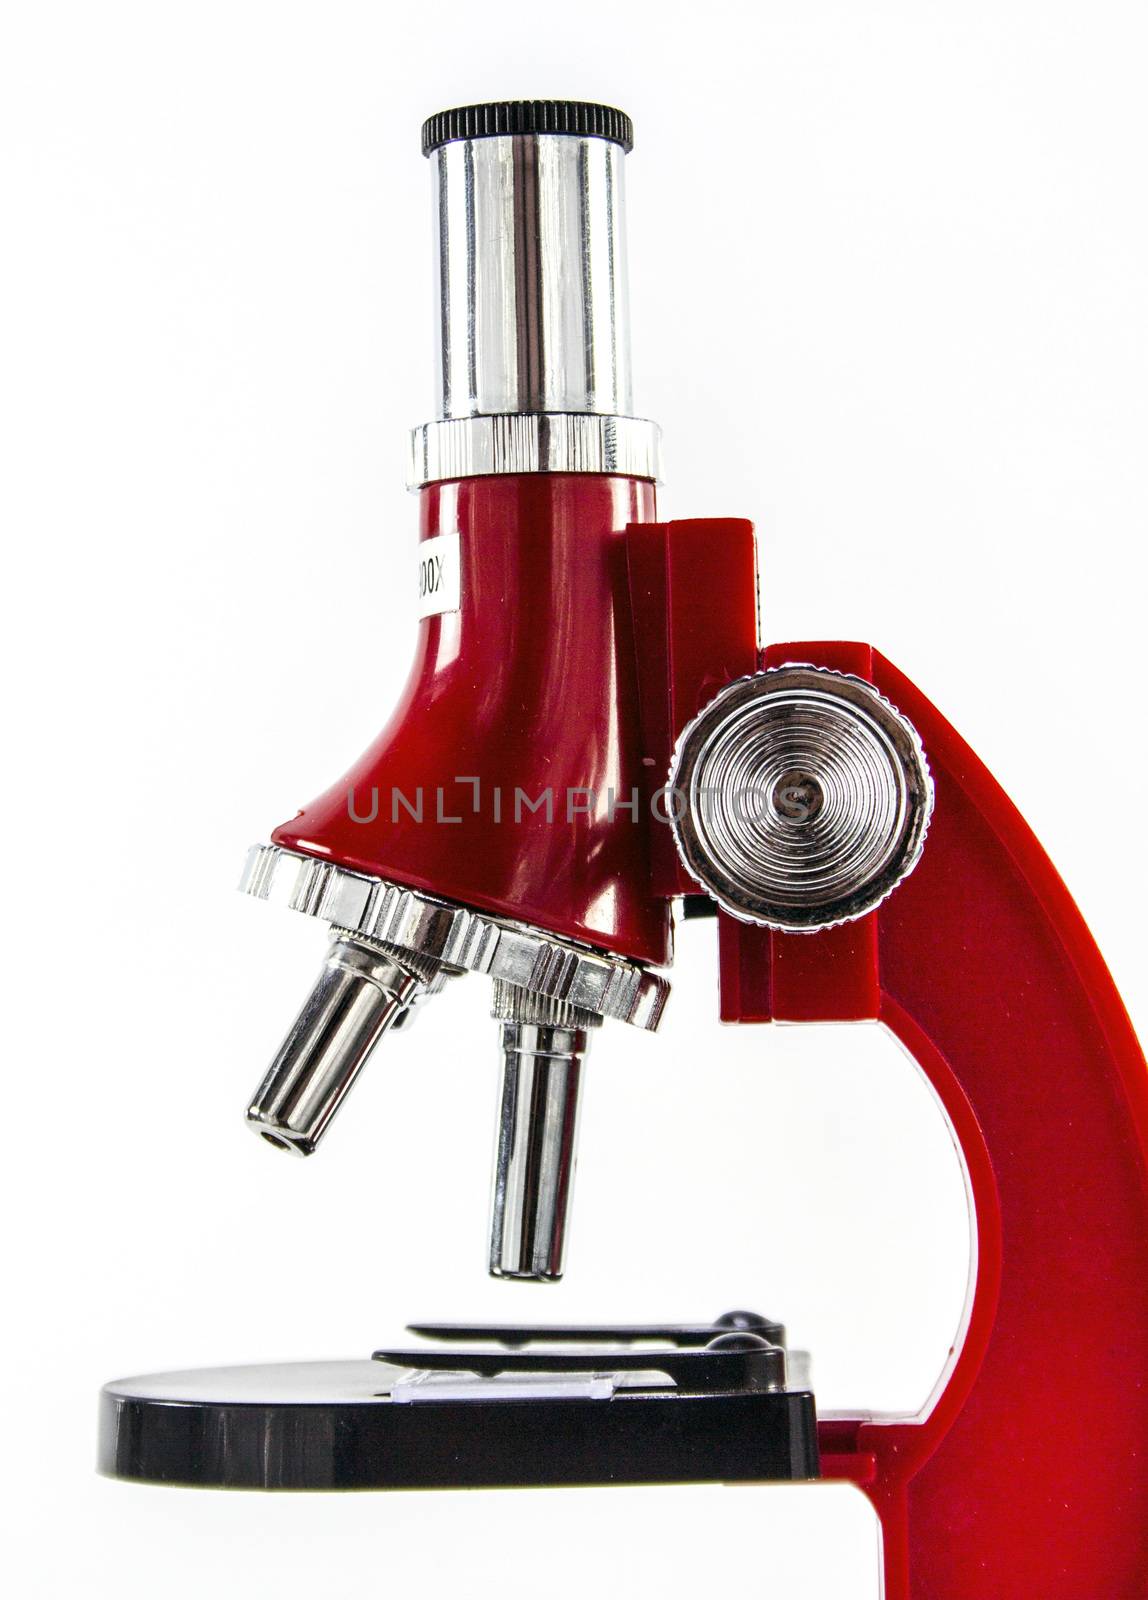 Modern red Microscope isolated on white background